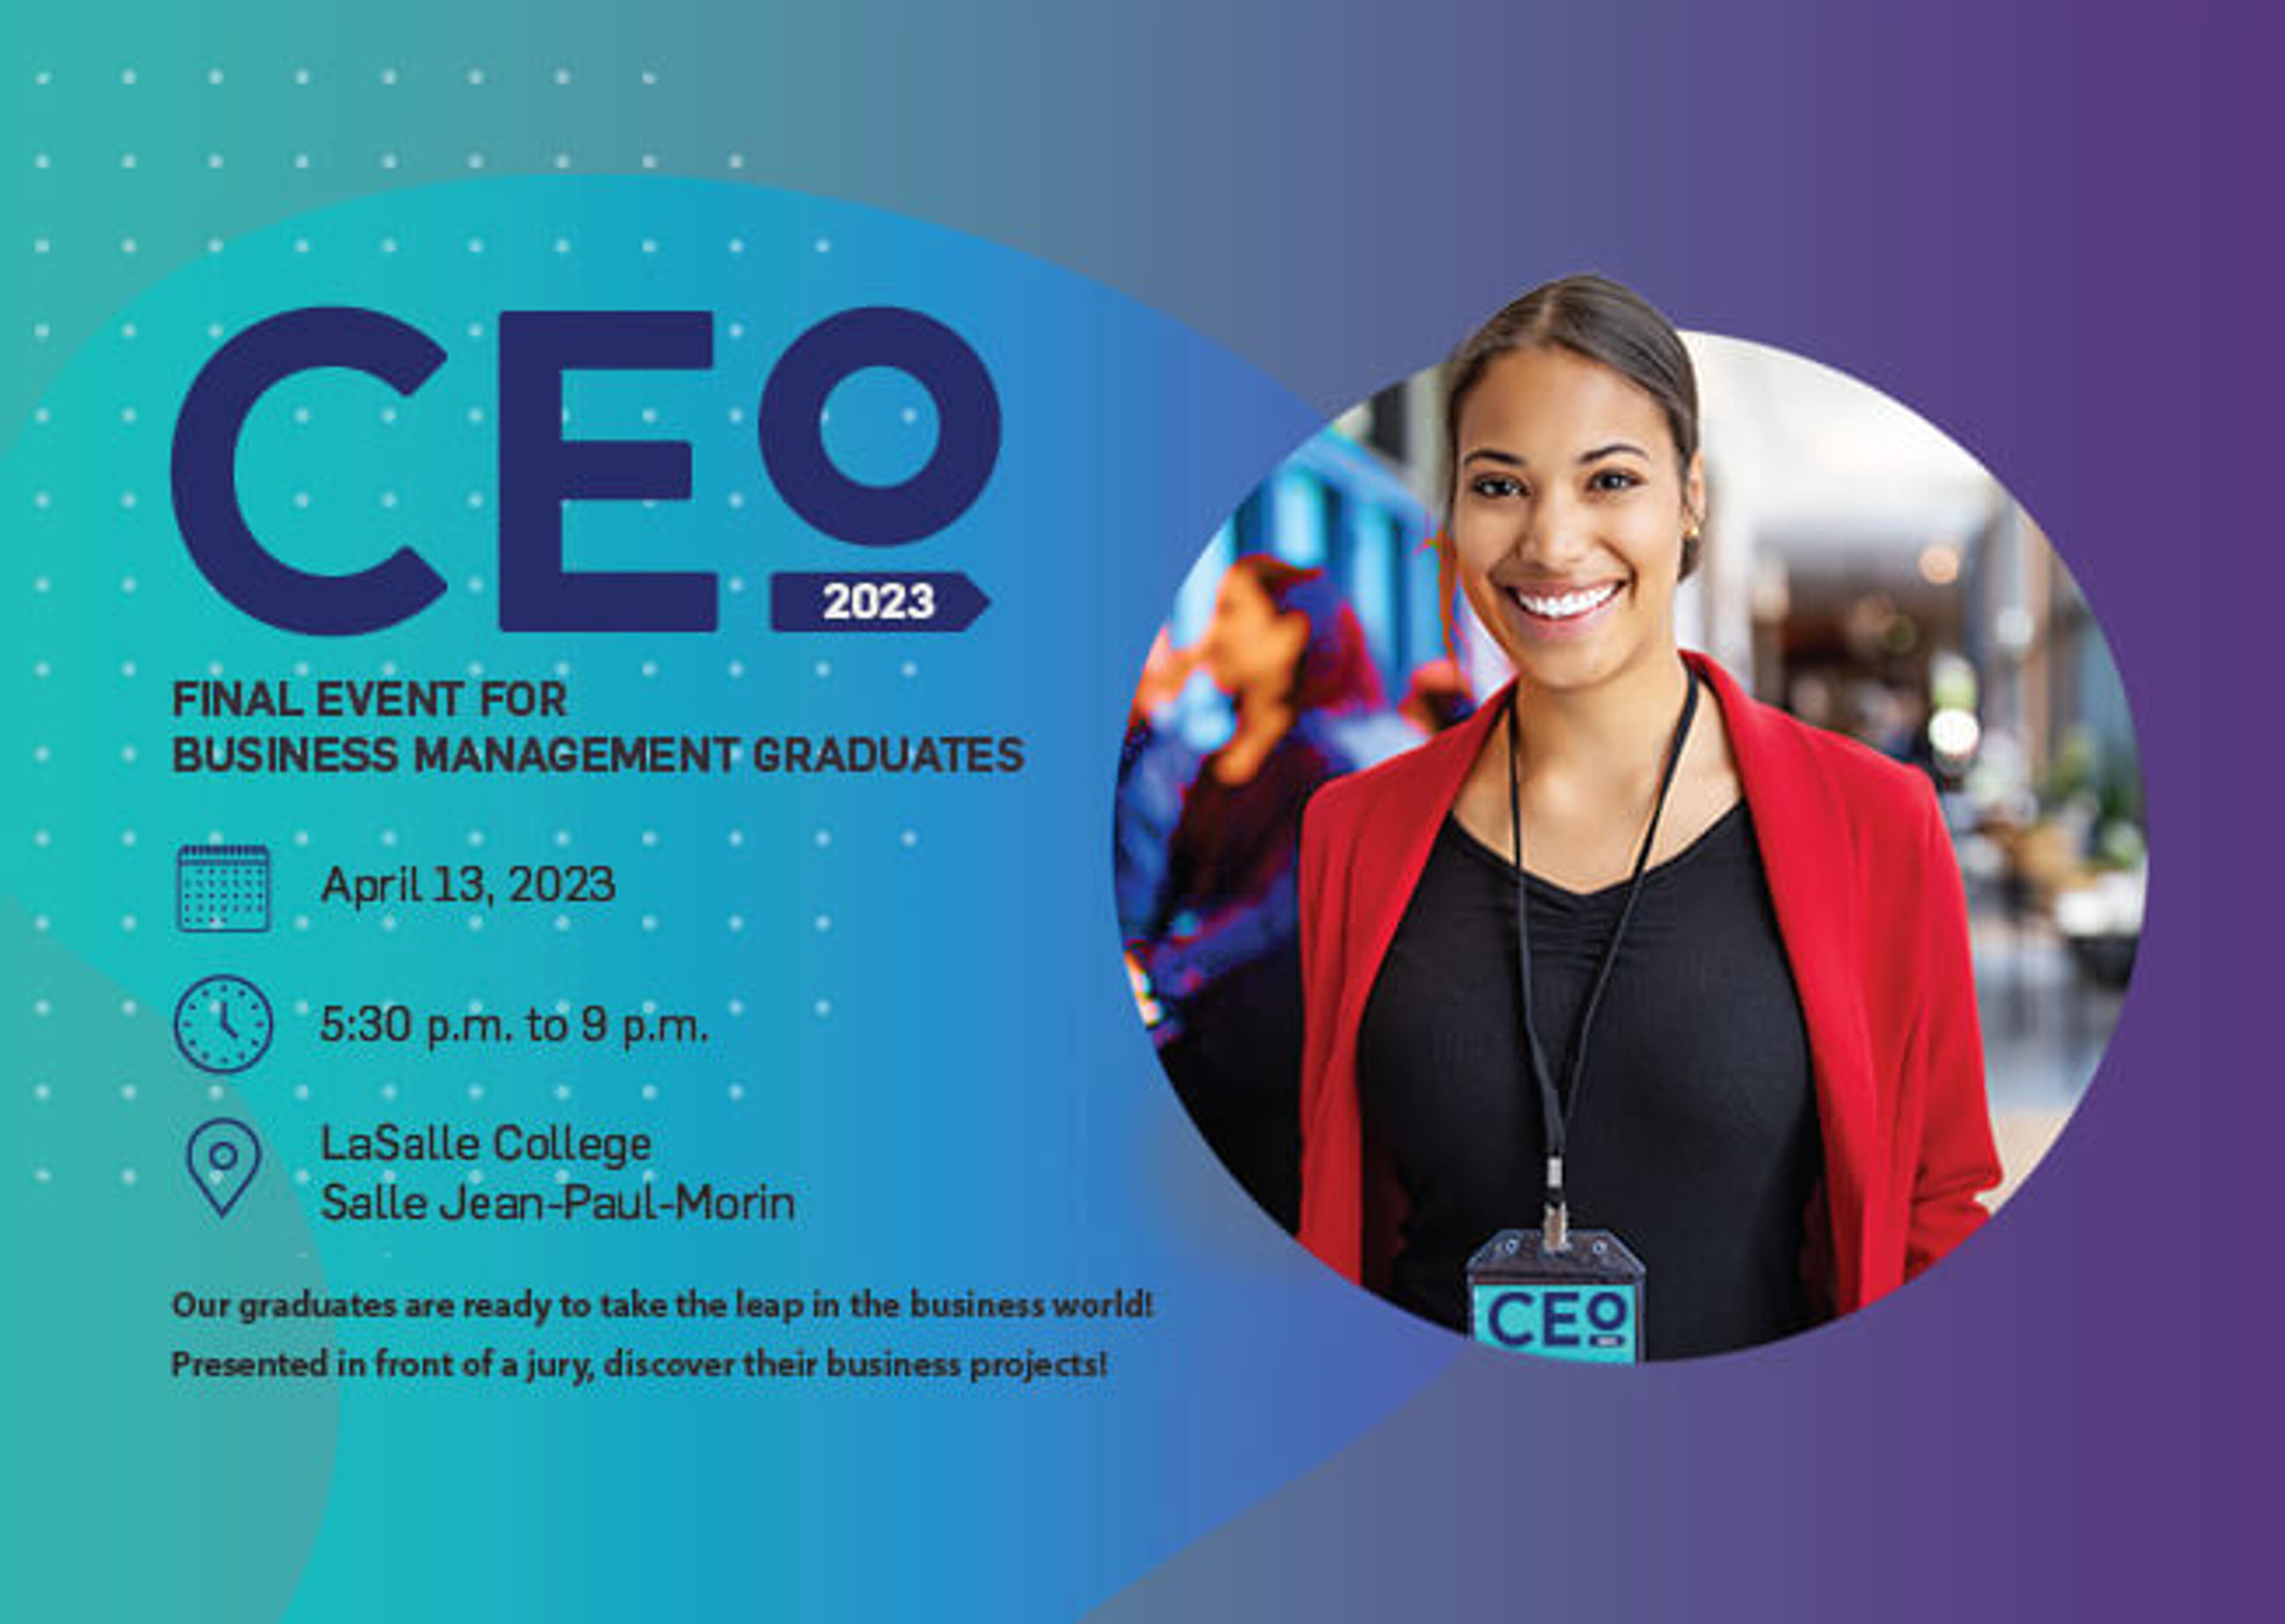 An inviting poster for the CEO 2023 event, highlighting a smiling female graduate in business attire, with details of the final event for Business Management graduates set for April 13, 2023.